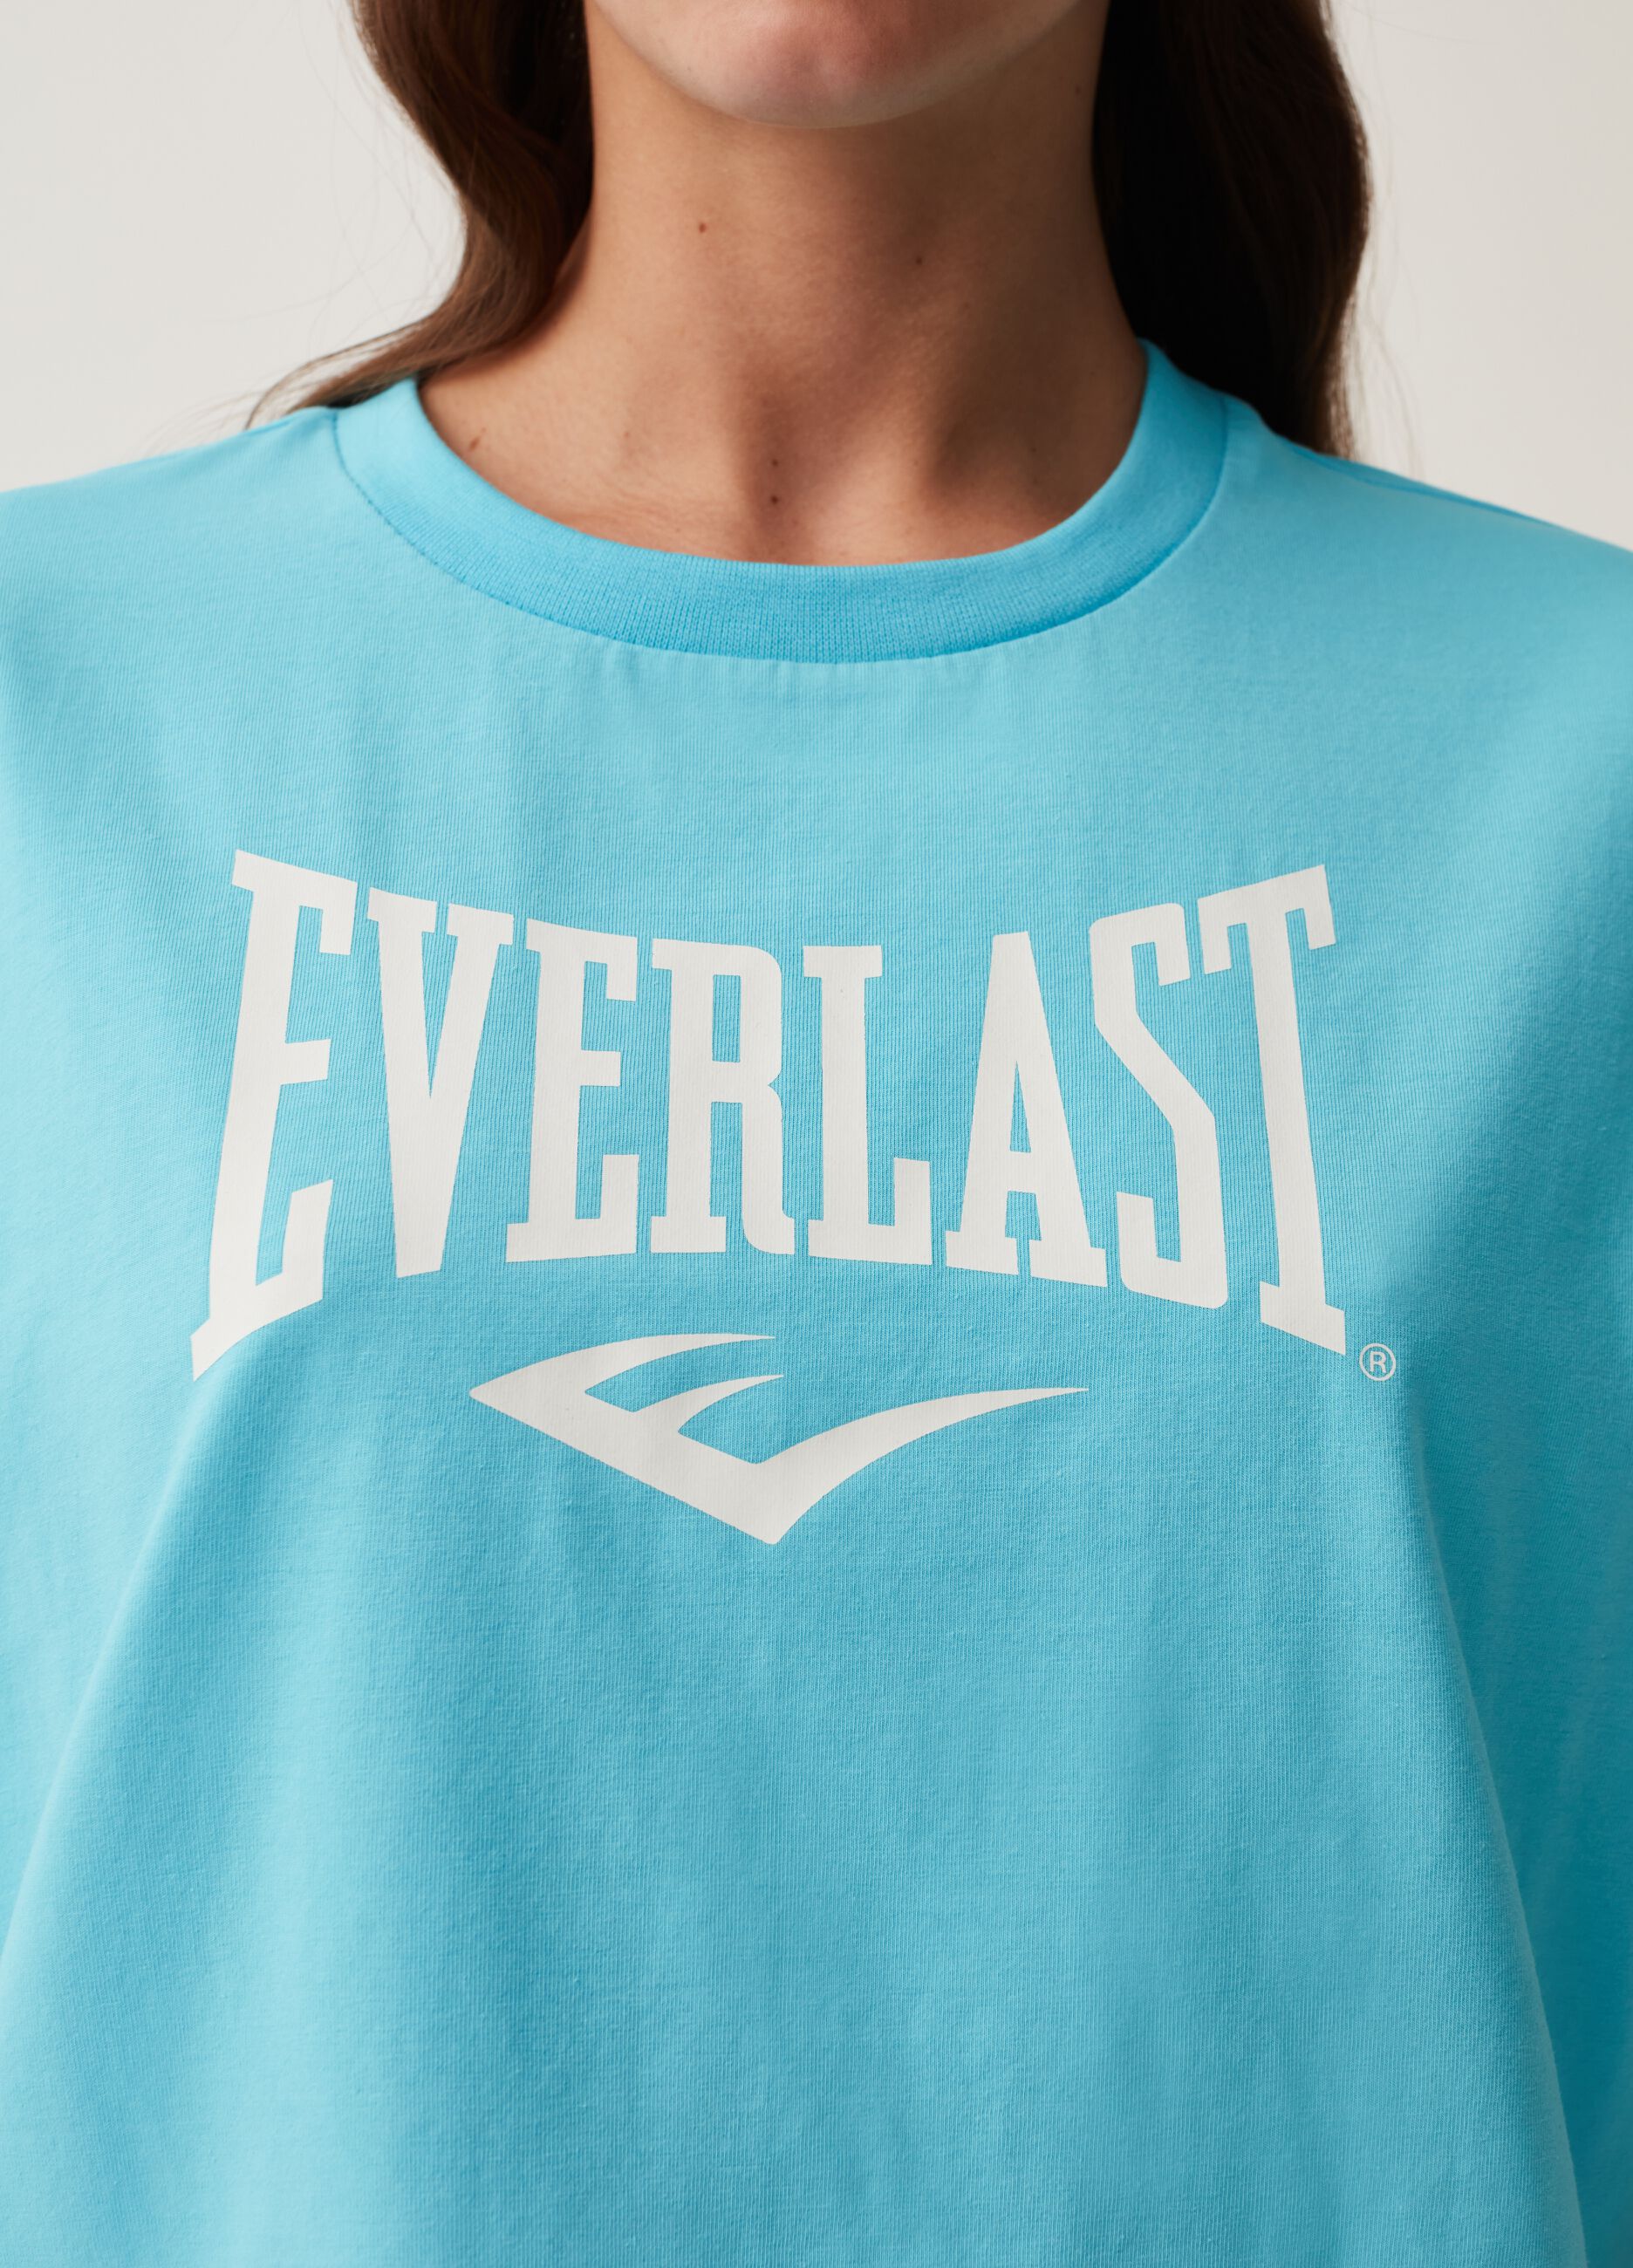 T-shirt with Everlast print